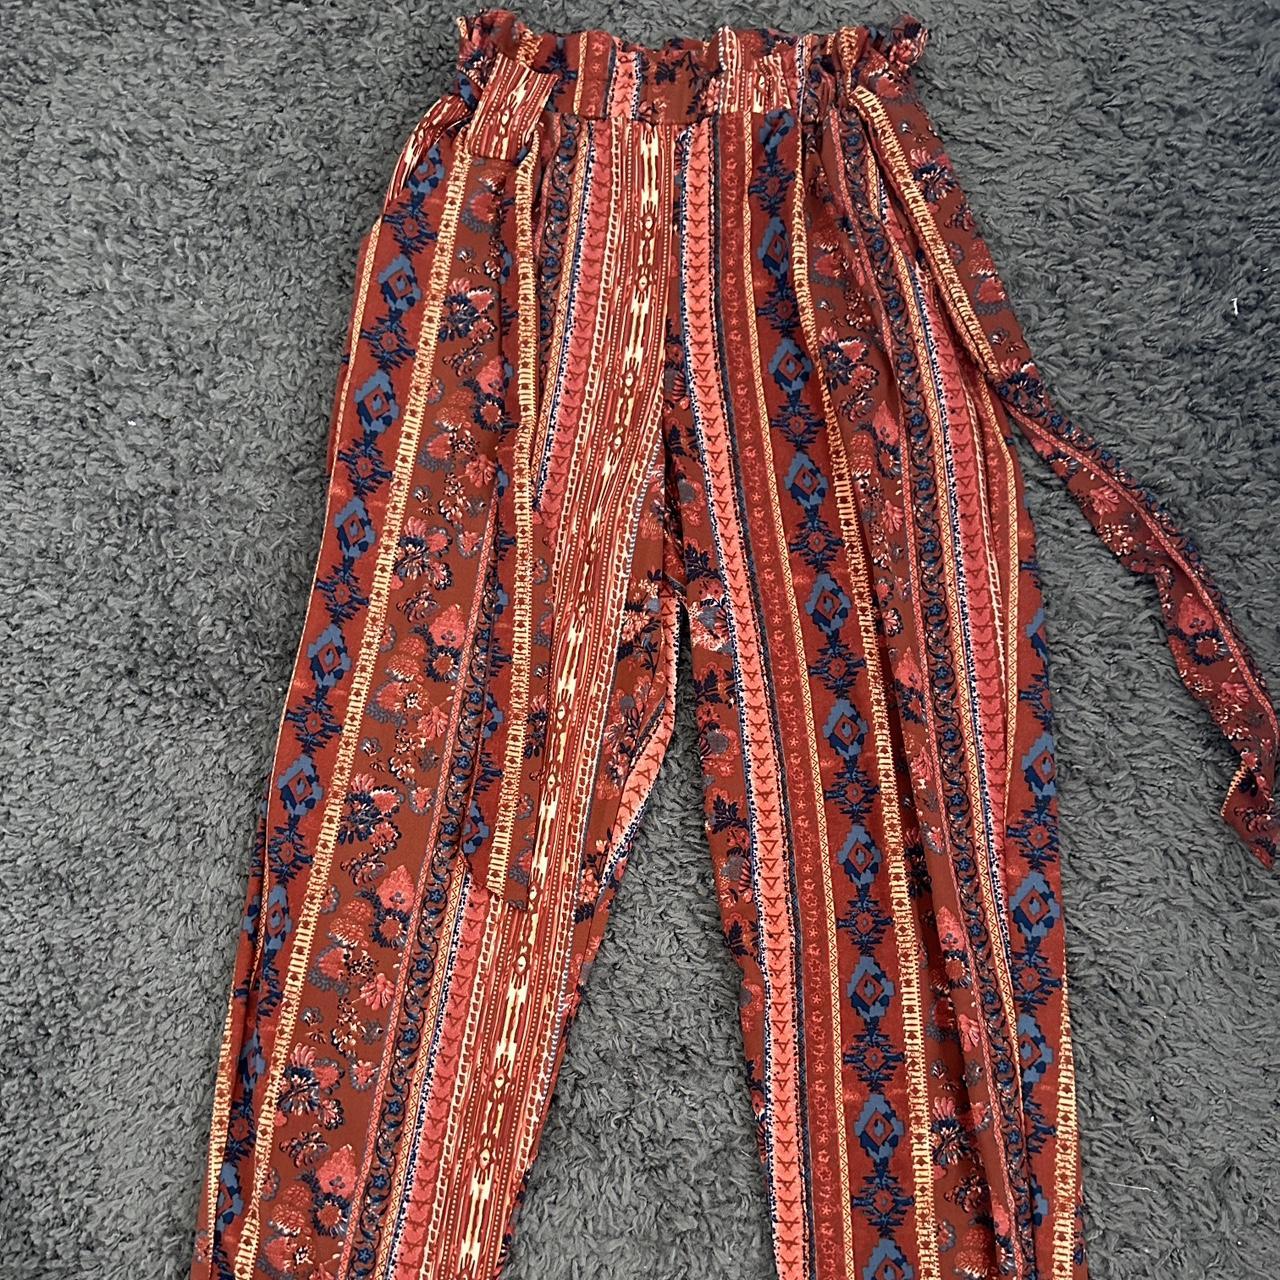 infamous bbl pants/ size small/ worn slightly